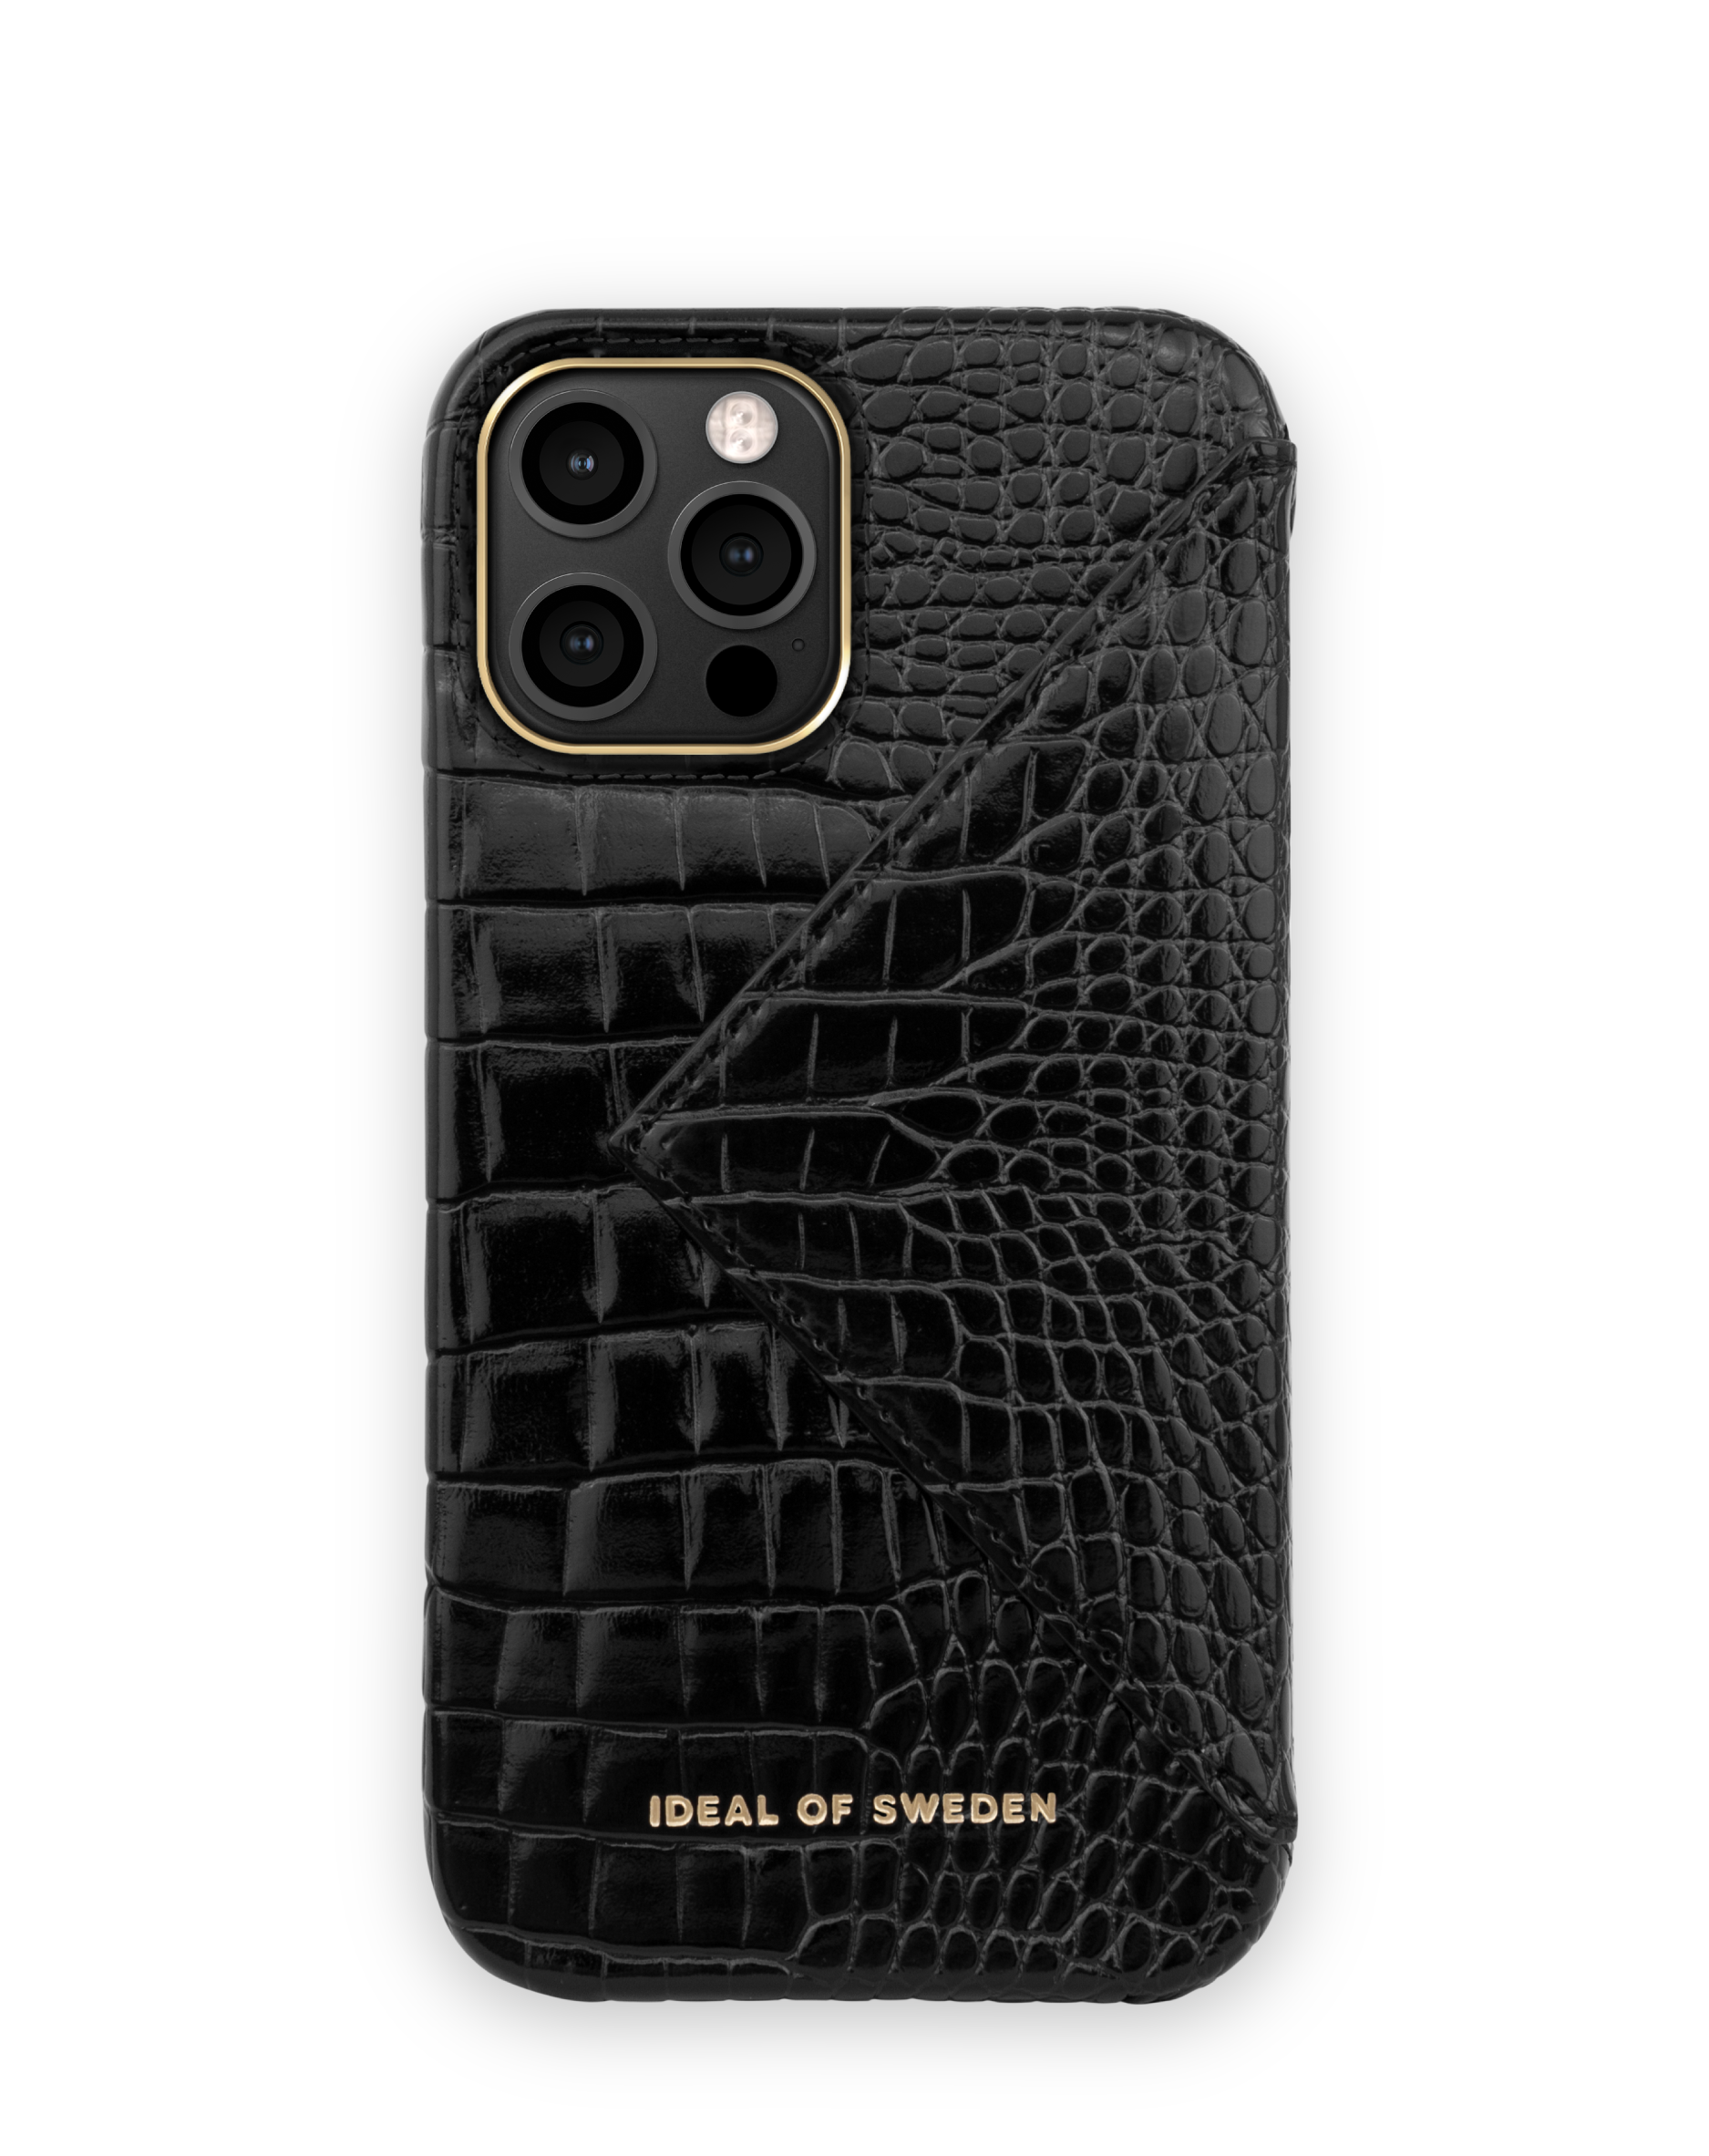 IDEAL OF SWEDEN IDSCAW20-2067, Max, Backcover, IPhone 12 Neo Noir Croco Pro Apple